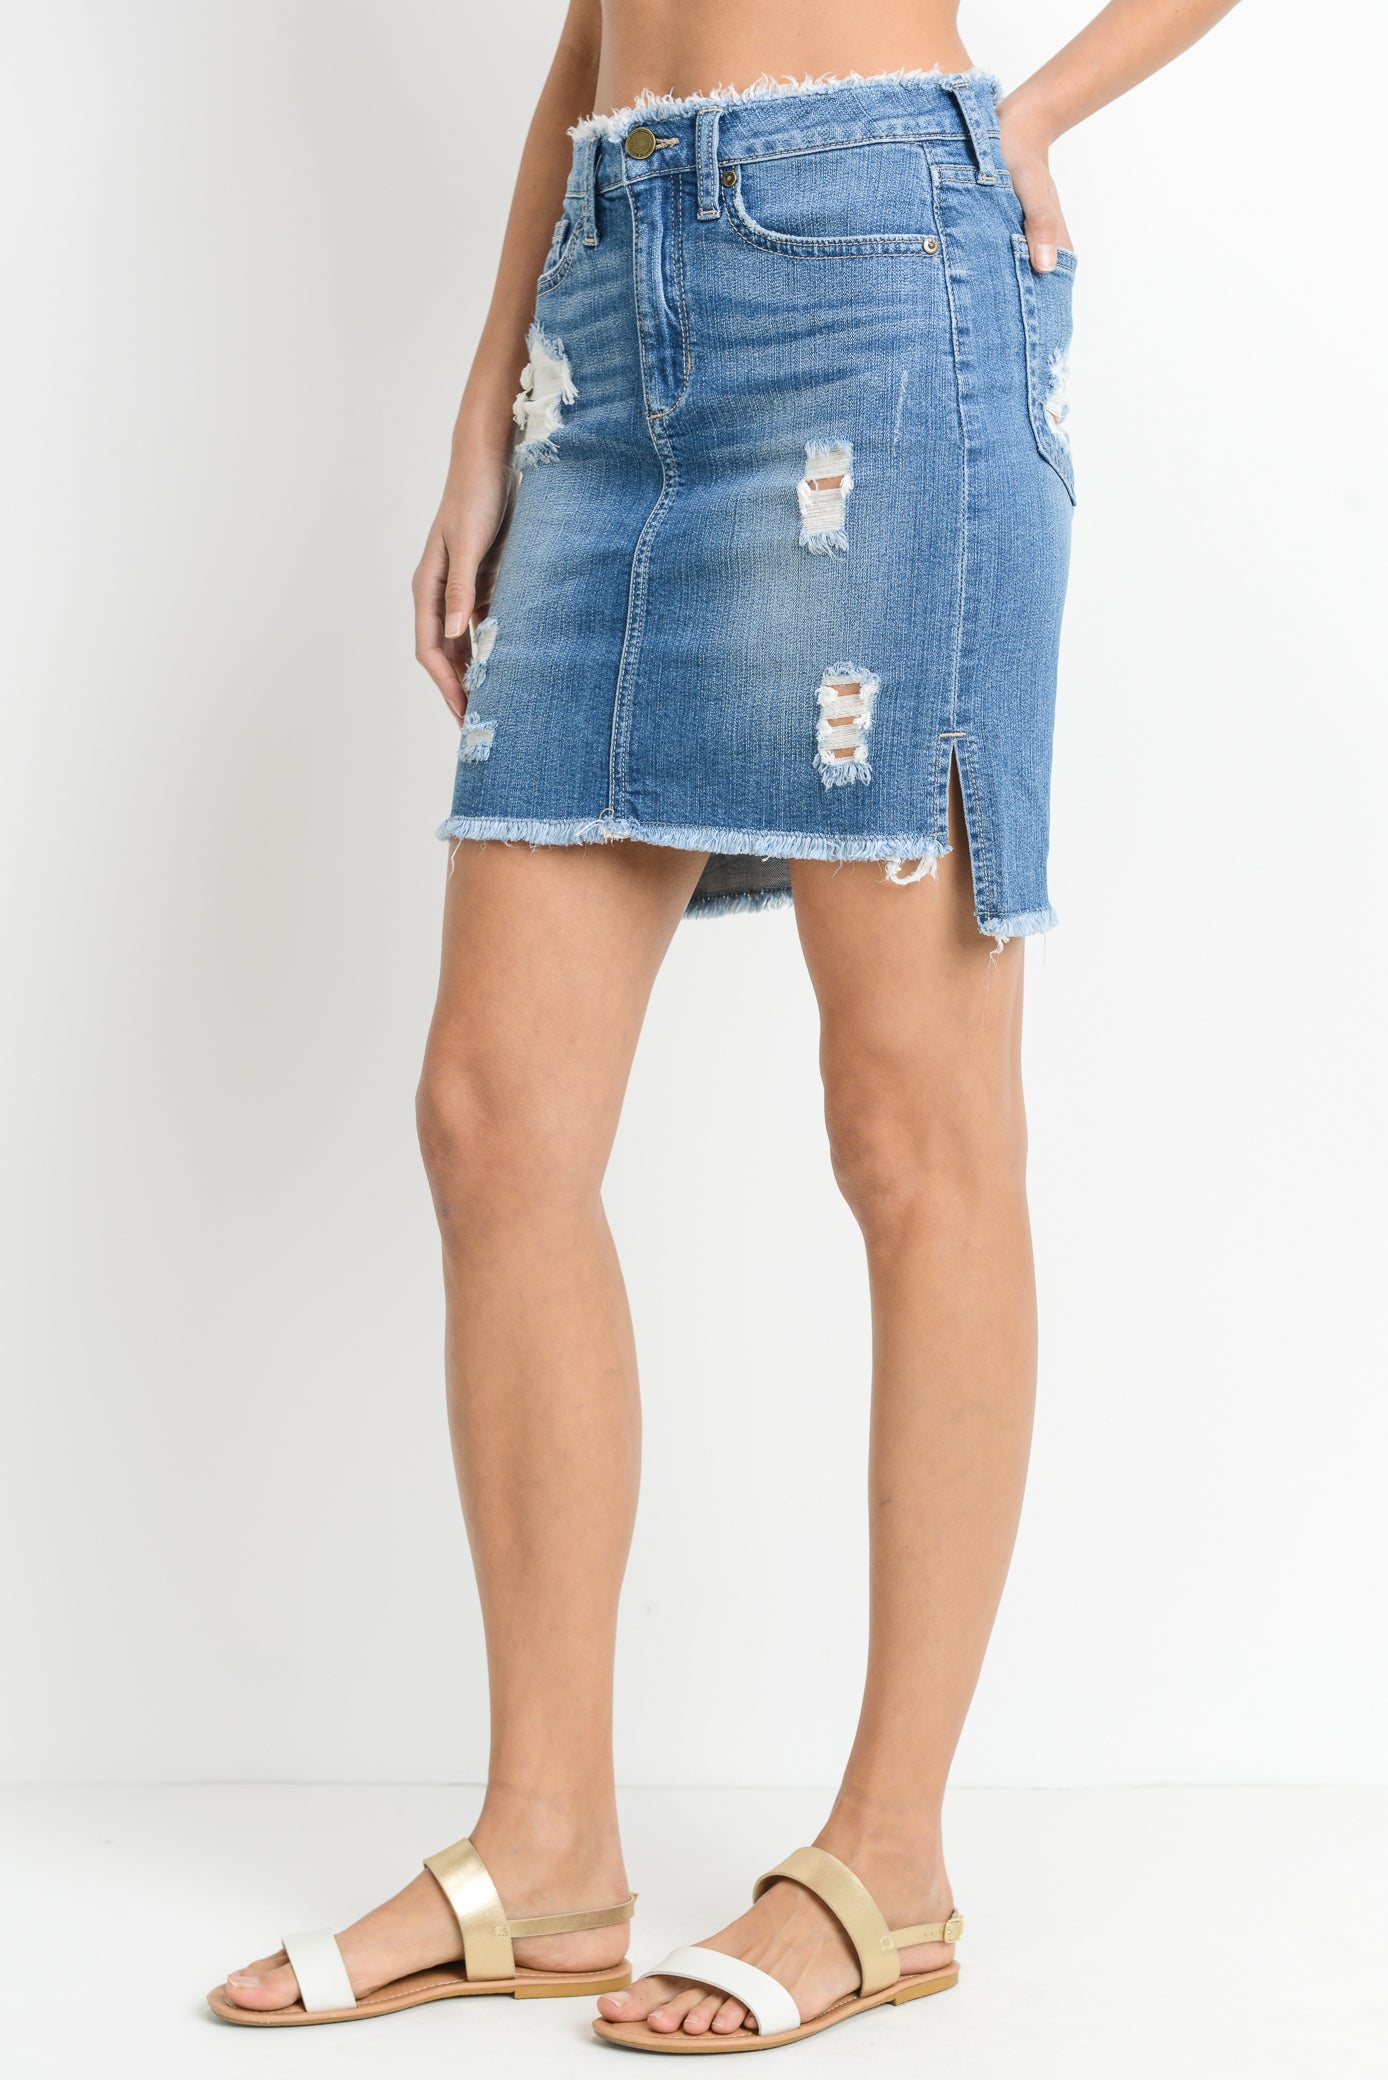 Distressed Denim Skirt for Core Wardrobe at the MARIA VINCENT Boutique ...